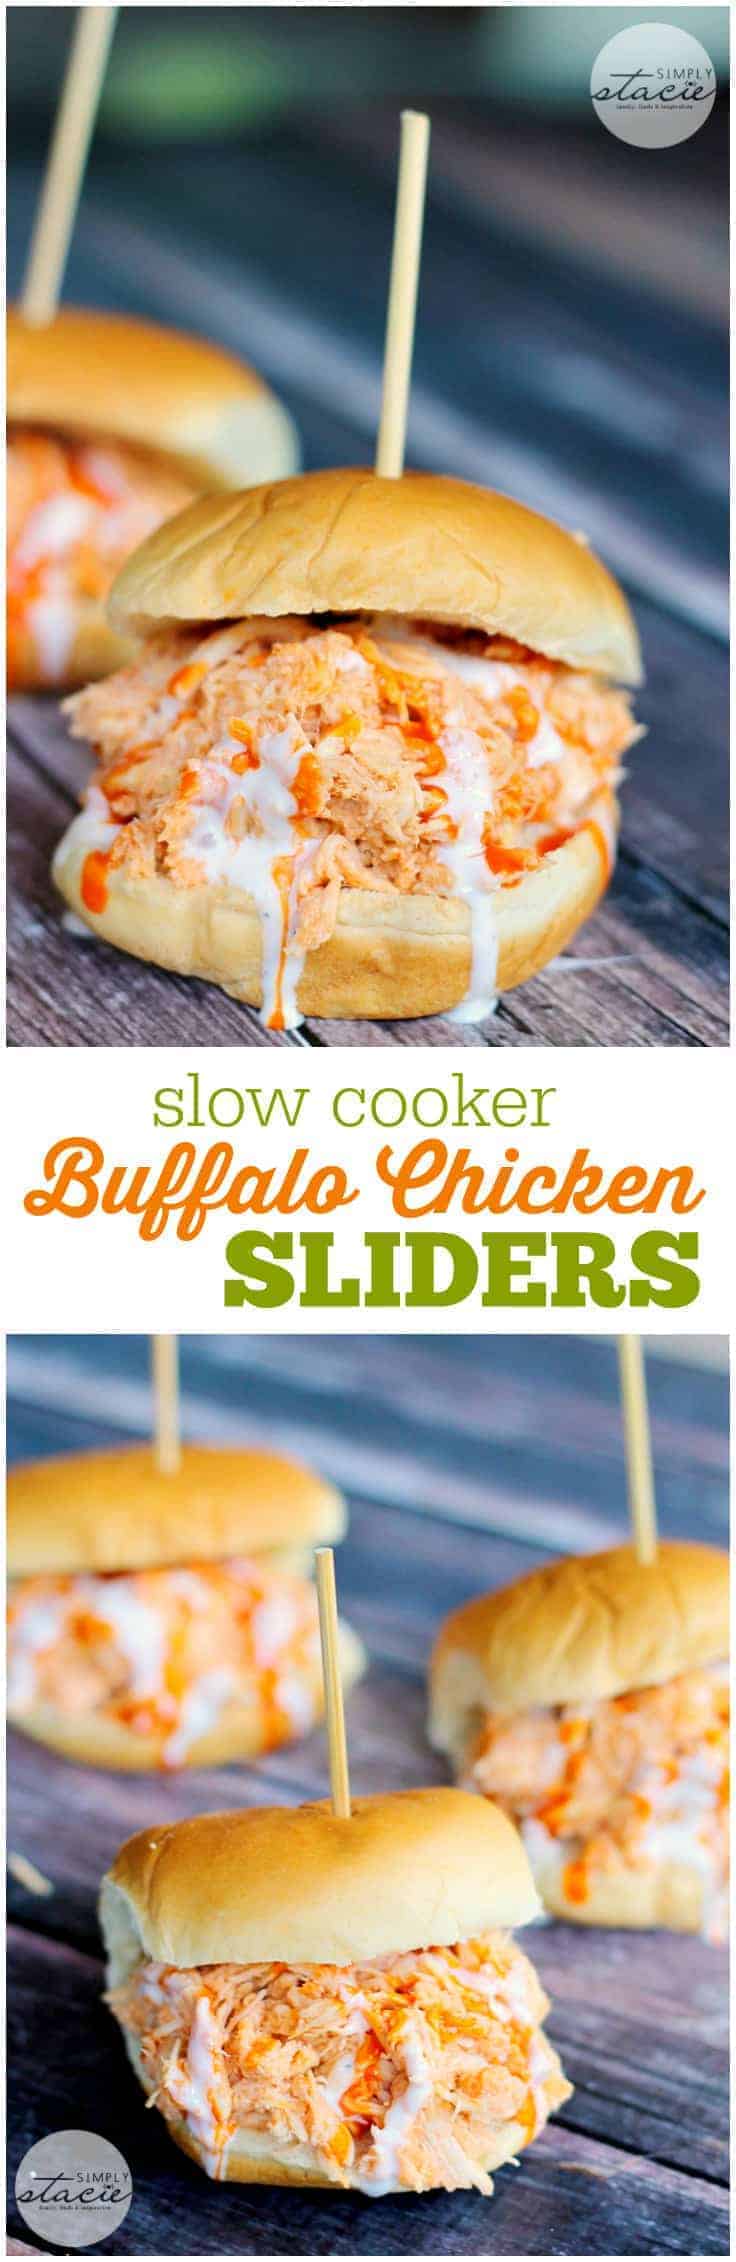 Slow Cooker Buffalo Chicken Sliders - Tender chicken seasoned with Frank's wing sauce and topped with Ranch dressing. These sliders are always a hit!